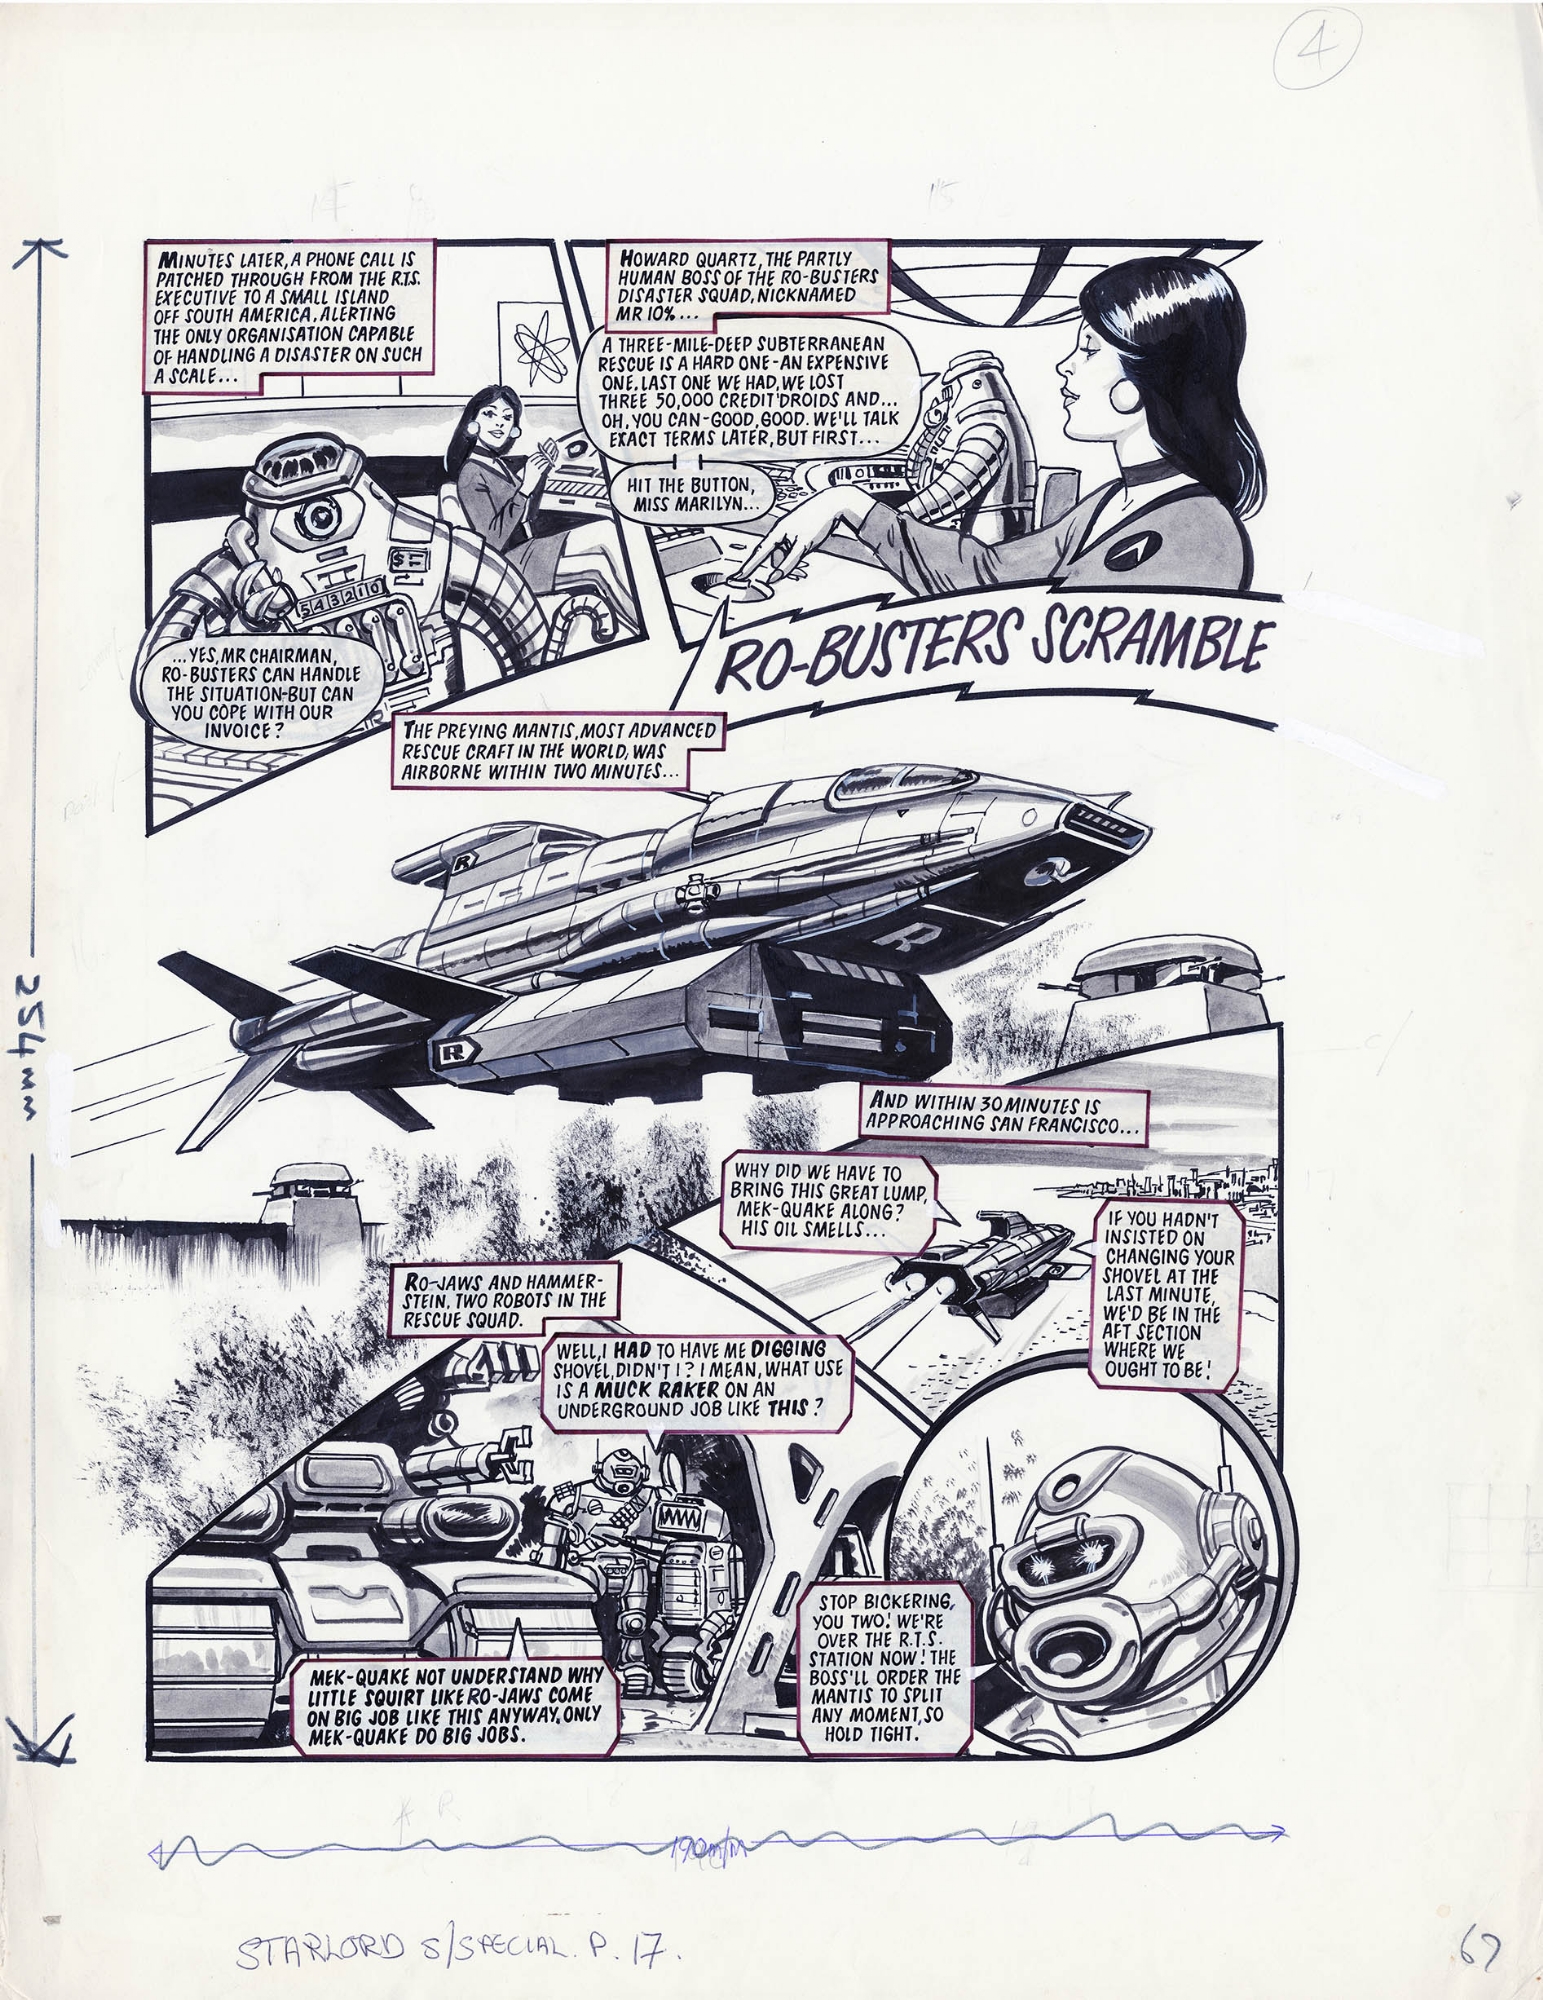 Robusters Starlord Summer Special 1978 Page 4 Geoff Campion